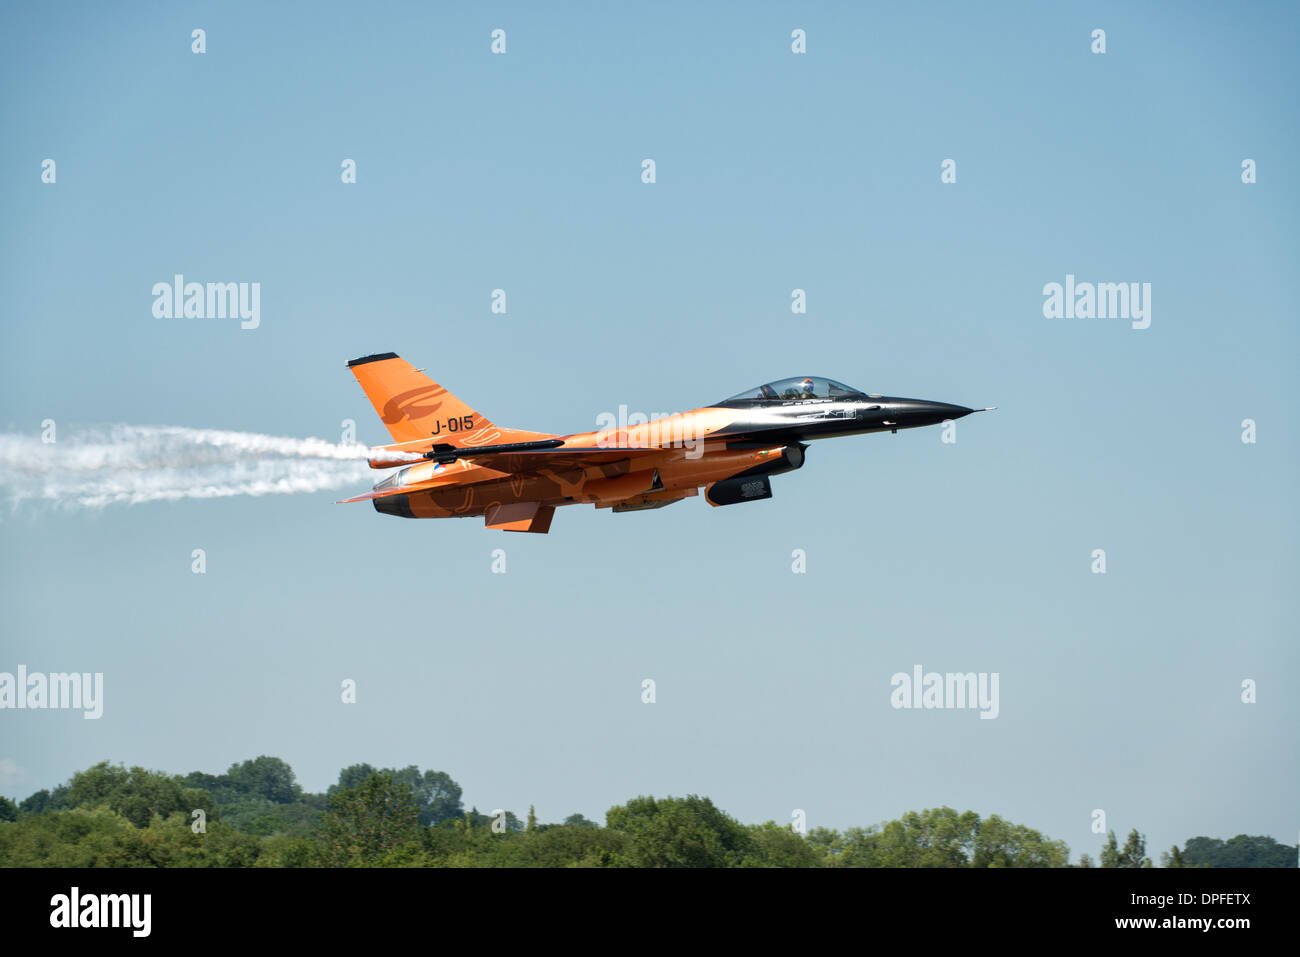 Lockheed Martin F-16 fighter jet of the Royal Netherlands Air Force demonstration team in it's striking orange livery at RIAT Stock Photo